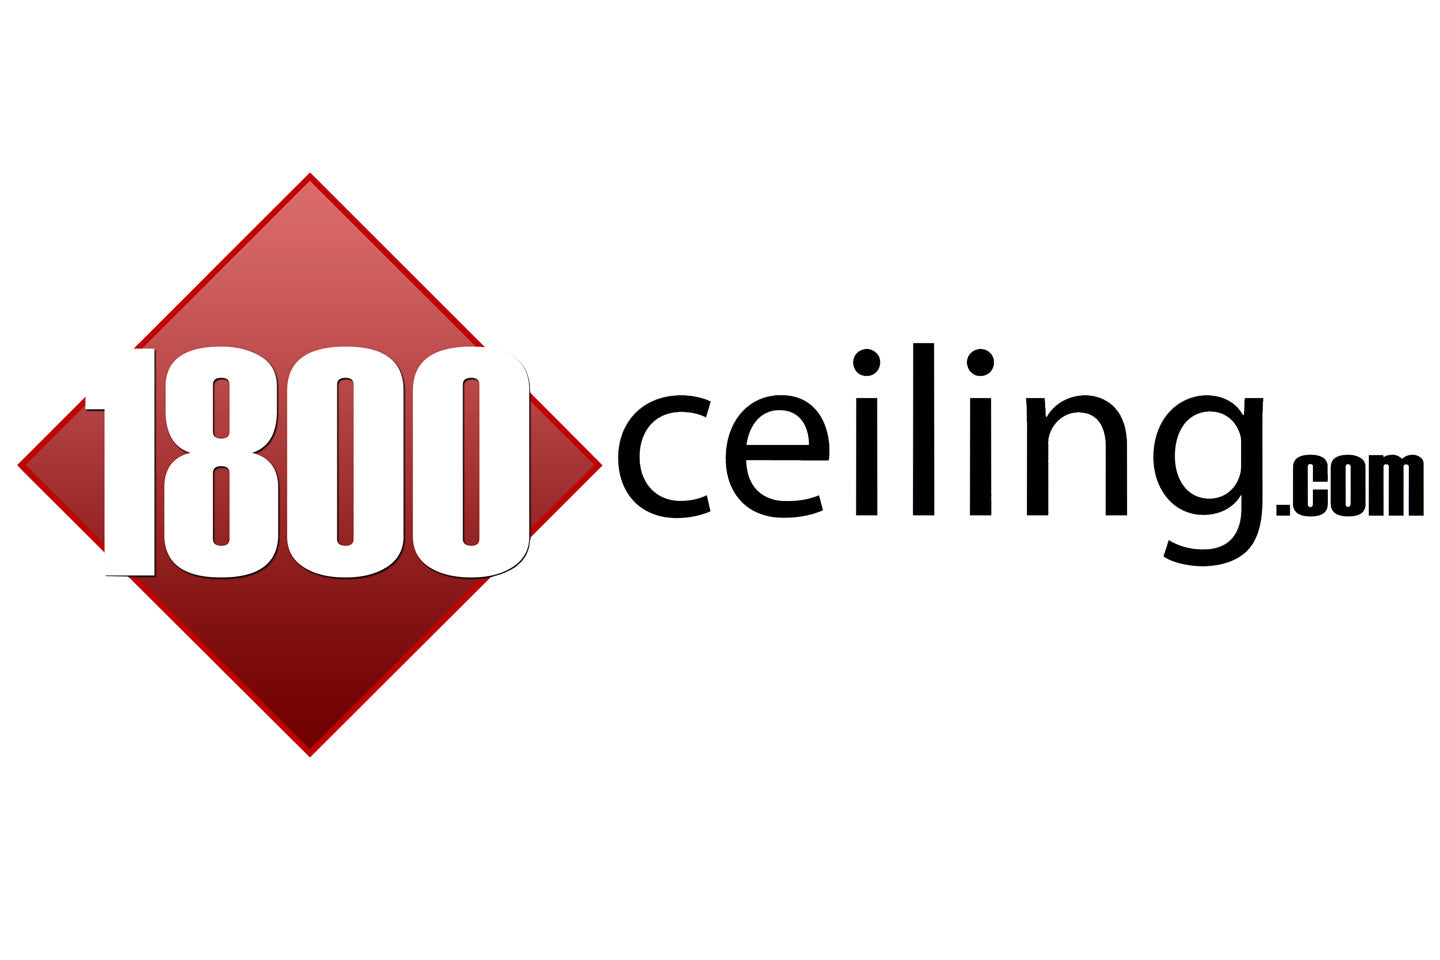 5% off With 1800ceiling Discount Code